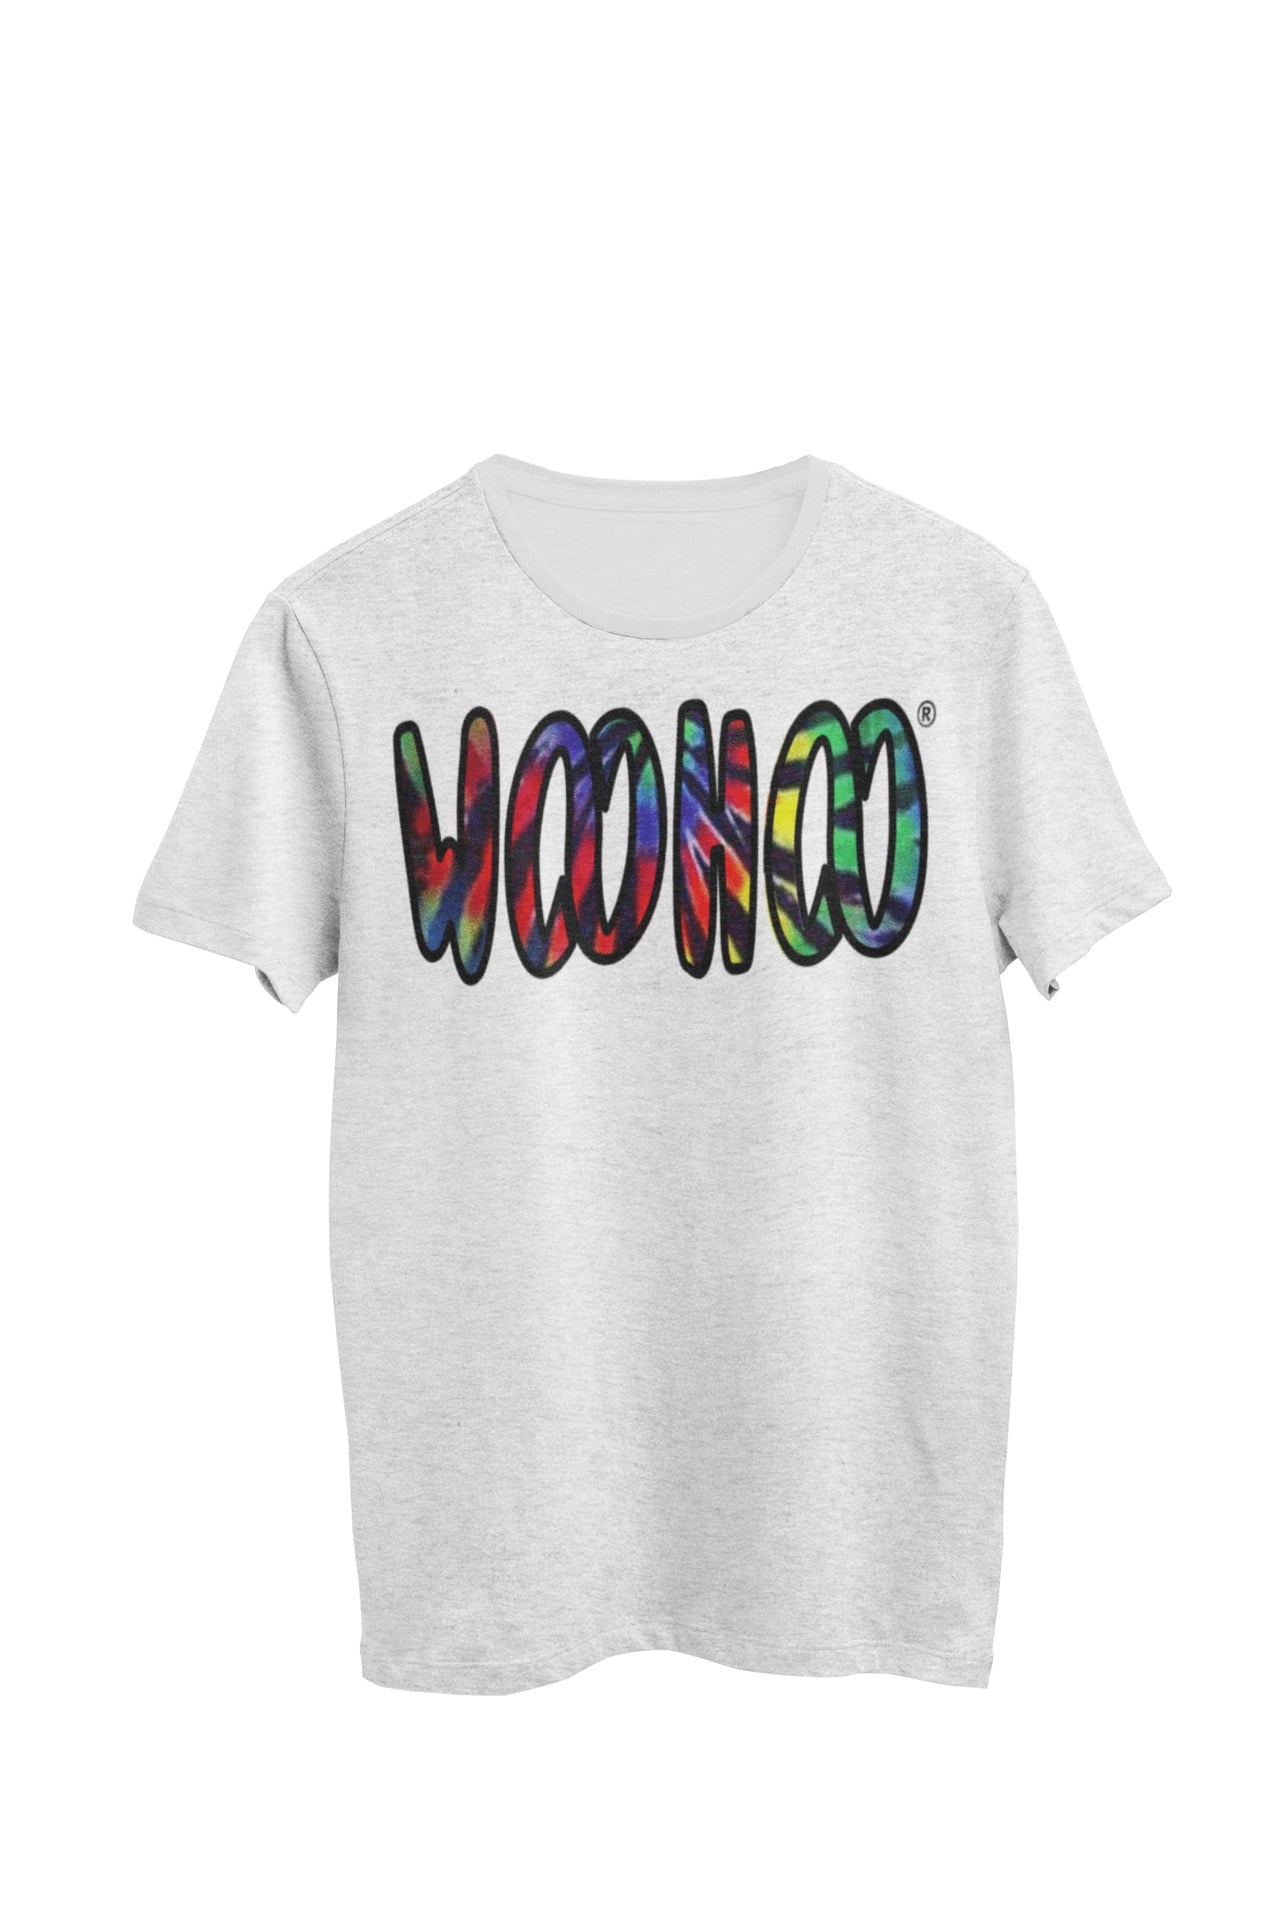 Heather gray unisex t-shirt designed by WooHoo Apparel.  The design features a larger 'woohoo' font with tie-dye inside the outline, called Bold Energy.